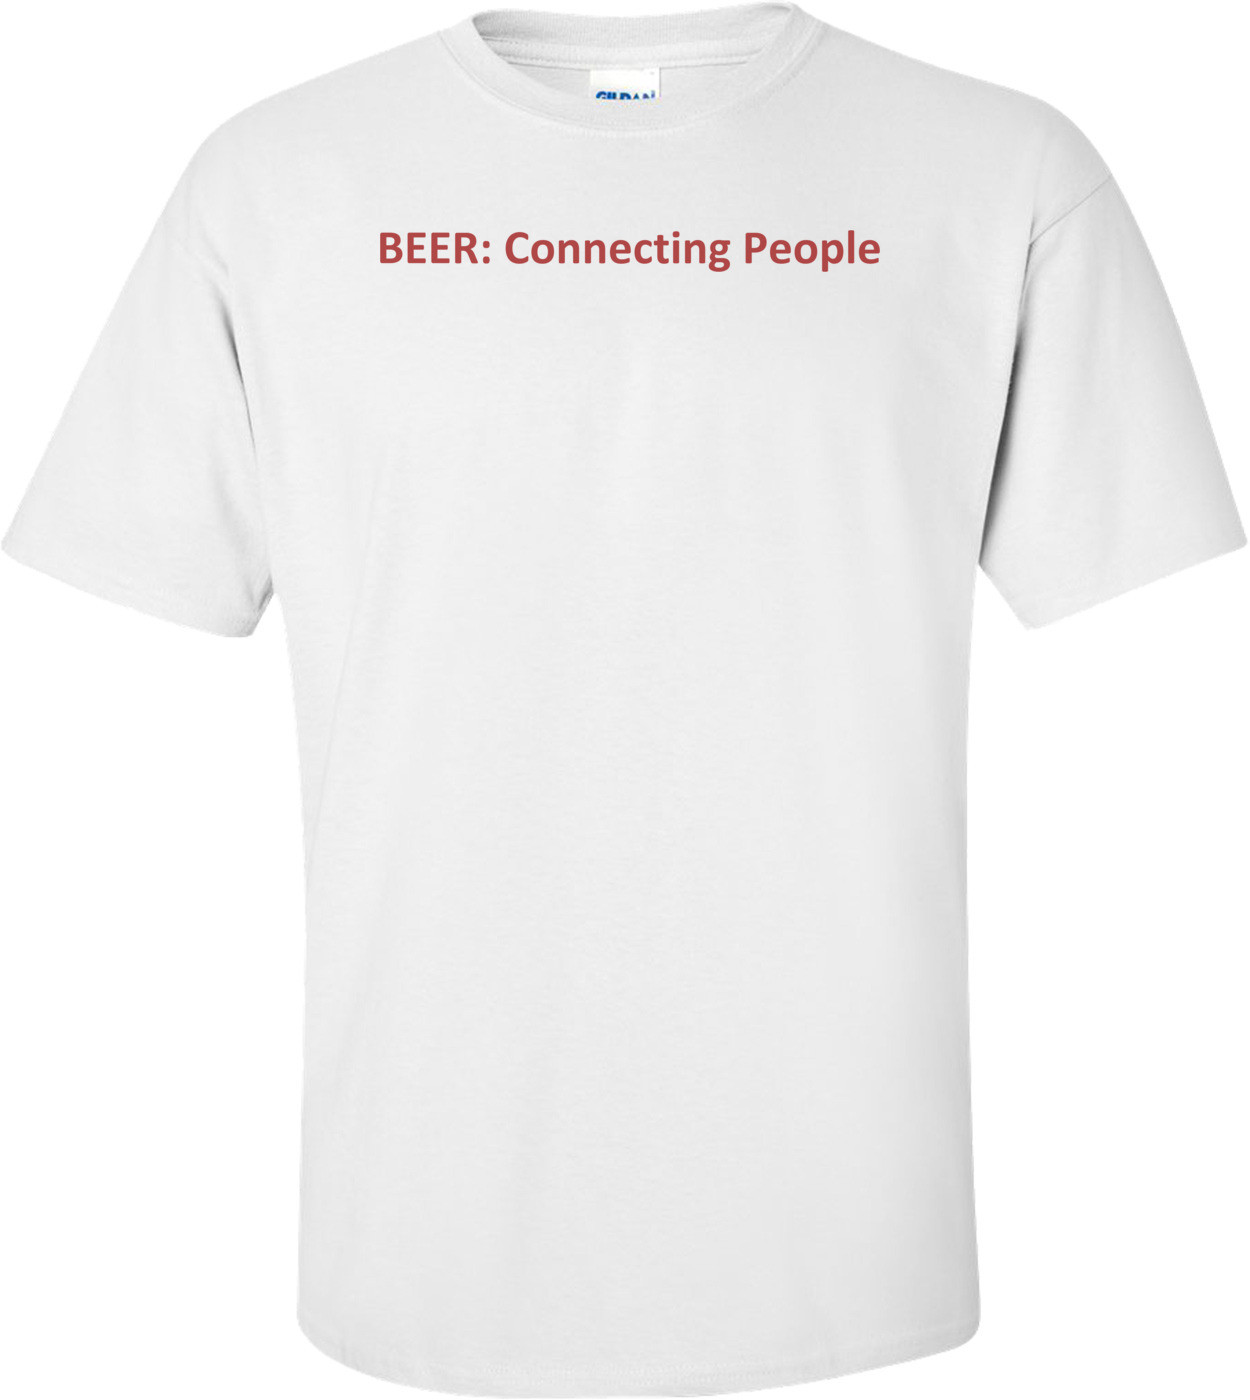 BEER: Connecting People